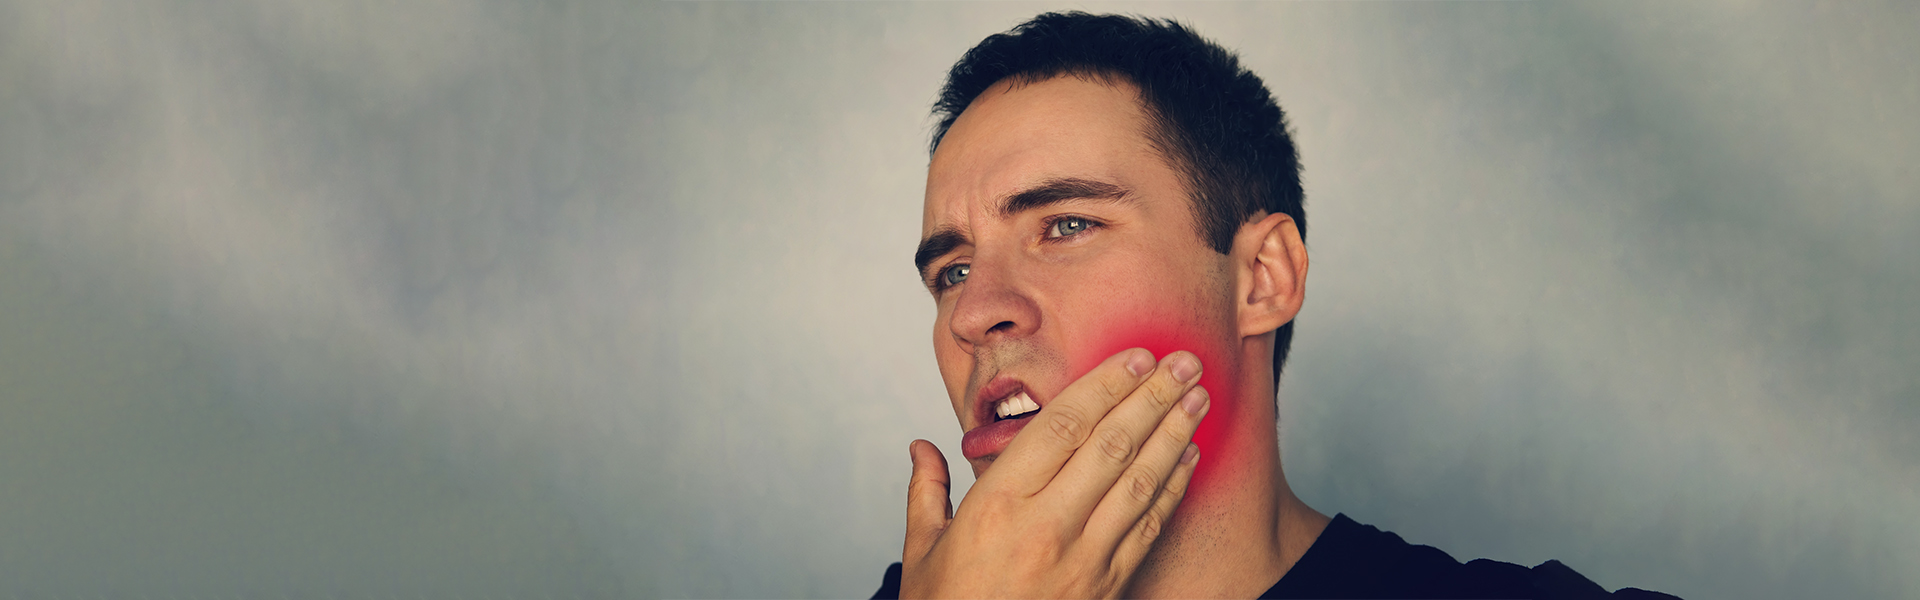 What Are The Benefits Of TMJ/TMD Treatment?